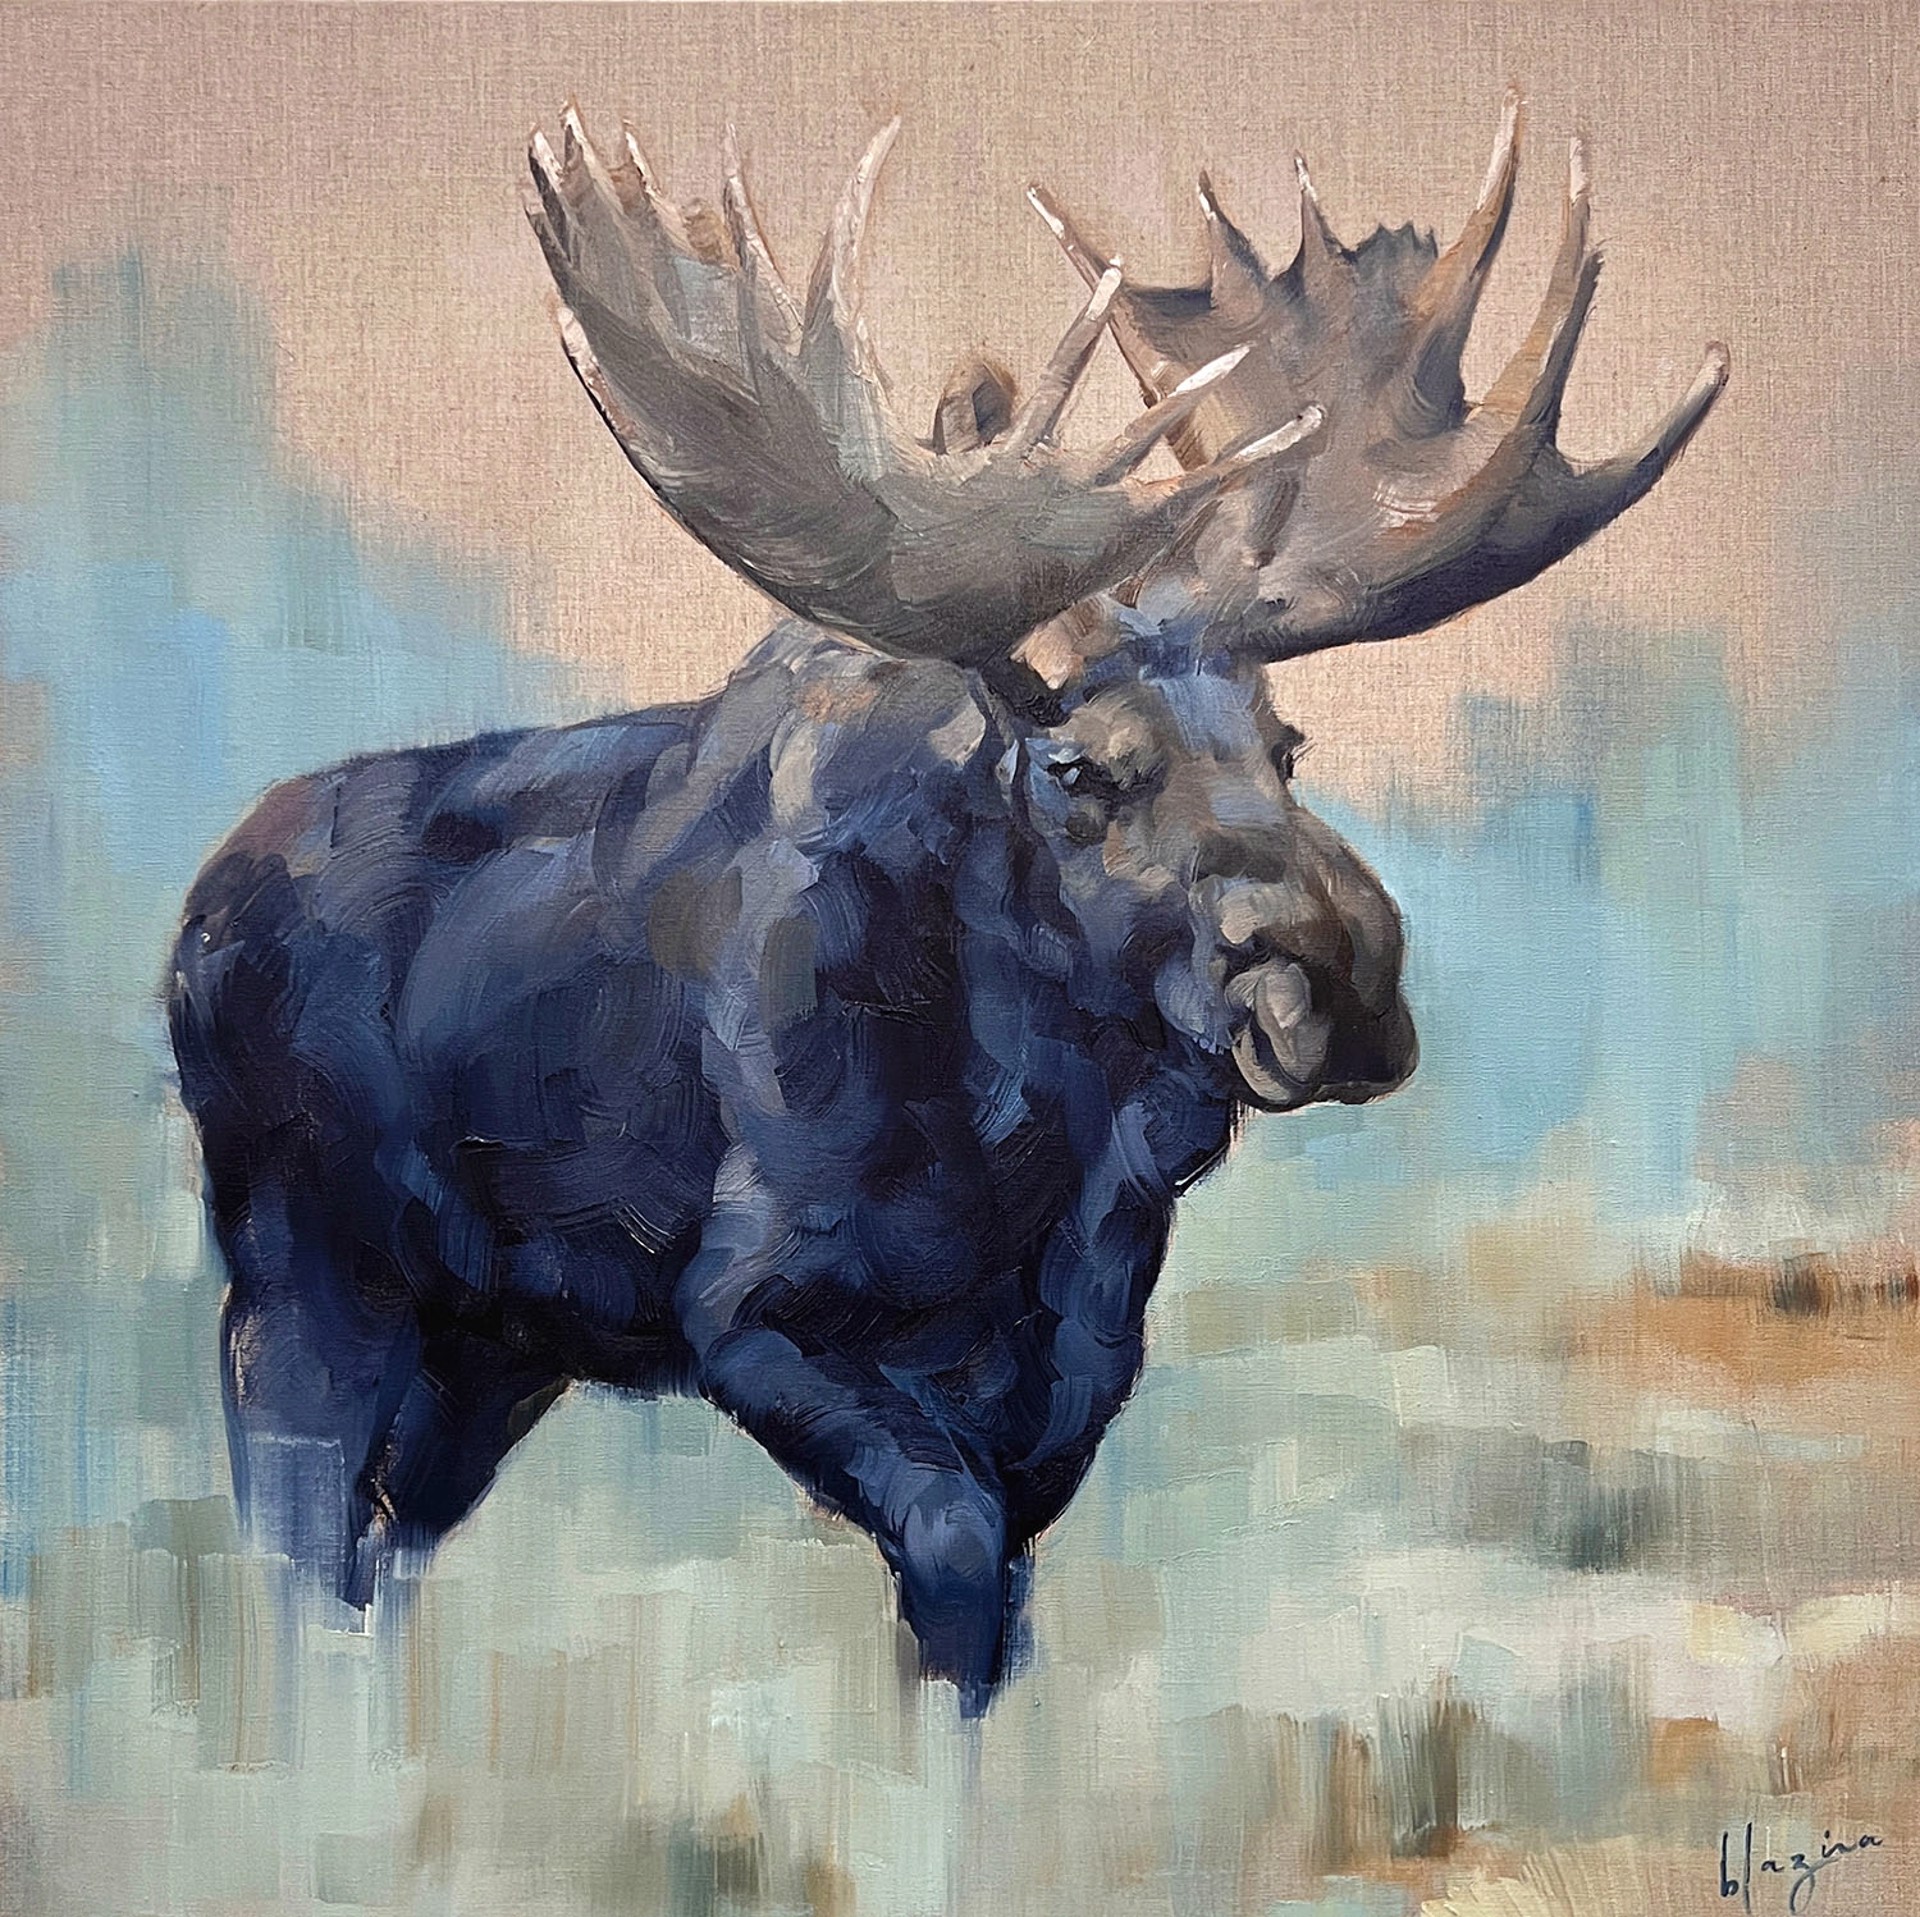 Original Oil Painting Featuring A Moose Over Abstract Turquoise Background With Exposed Linen